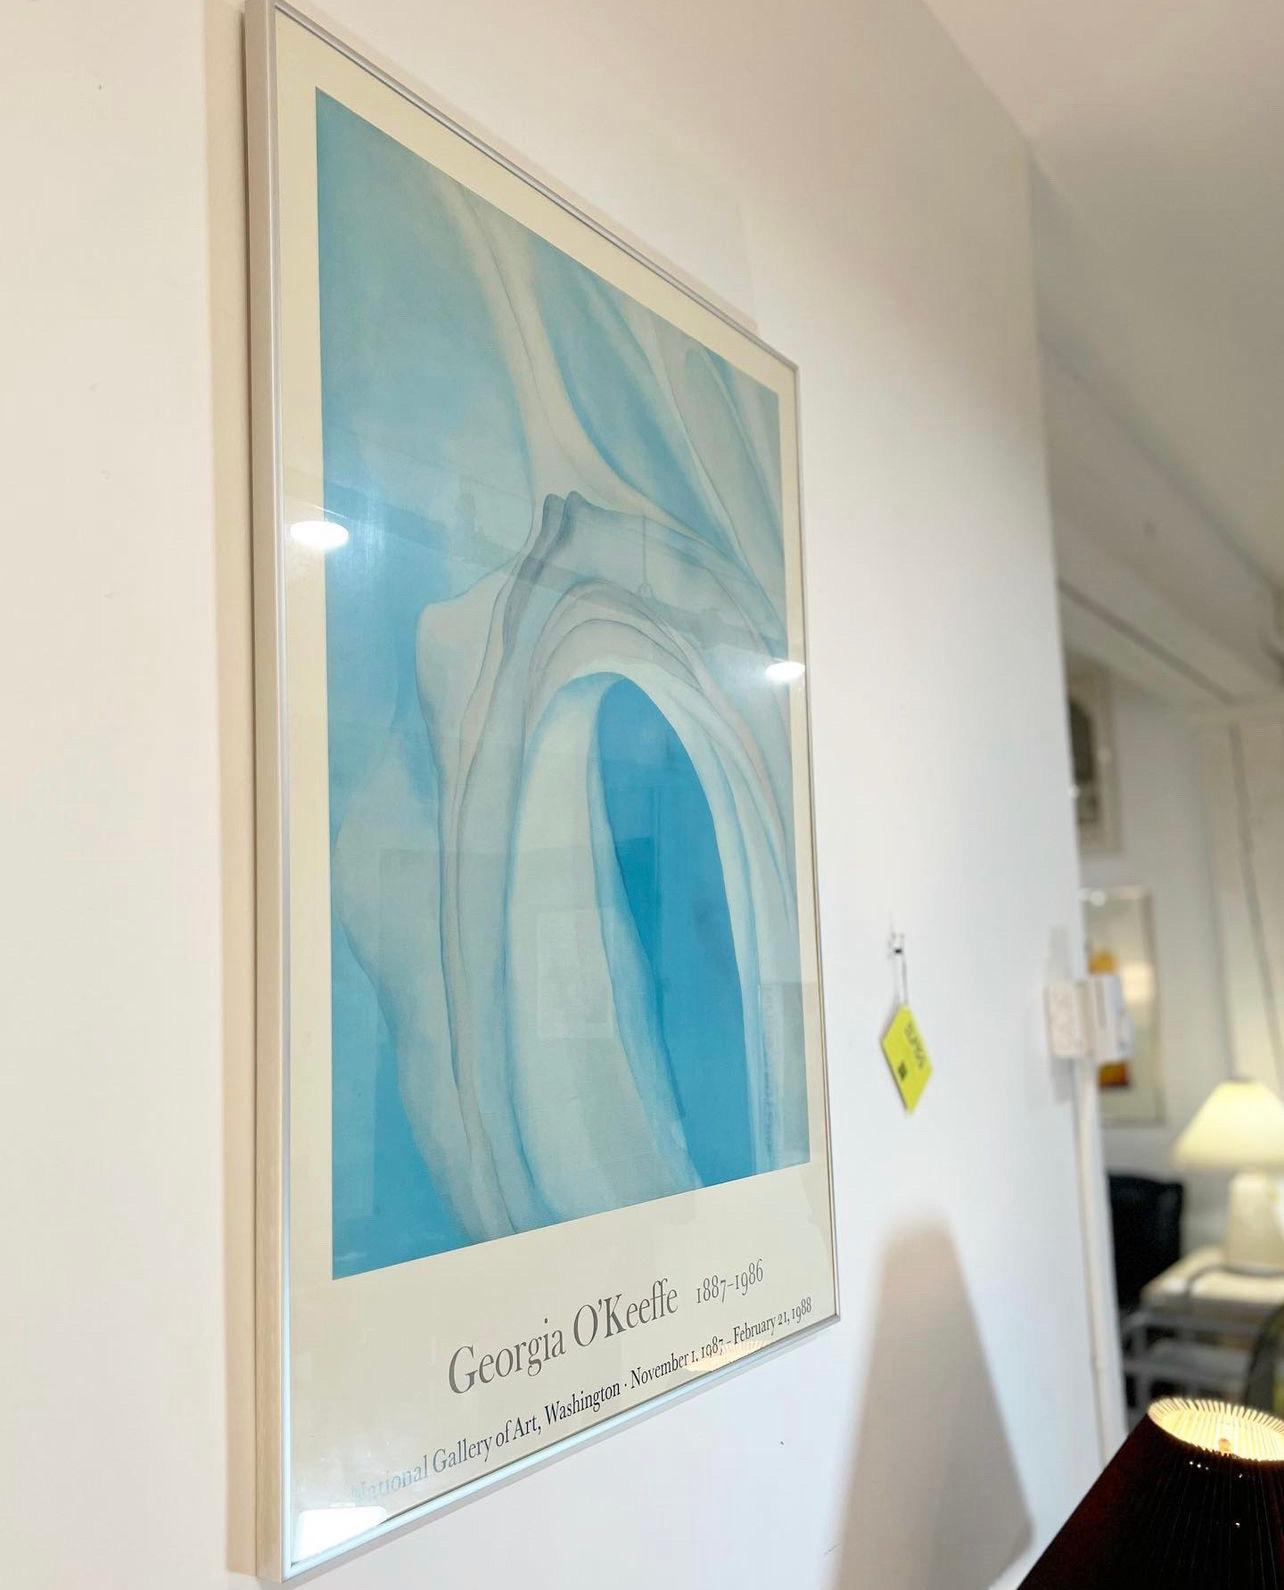 Stunning large scale Georgia O’Keeffe vintage lithograph.

Beautifully framed and ready to hang!

Measures: height 36”
width 27”